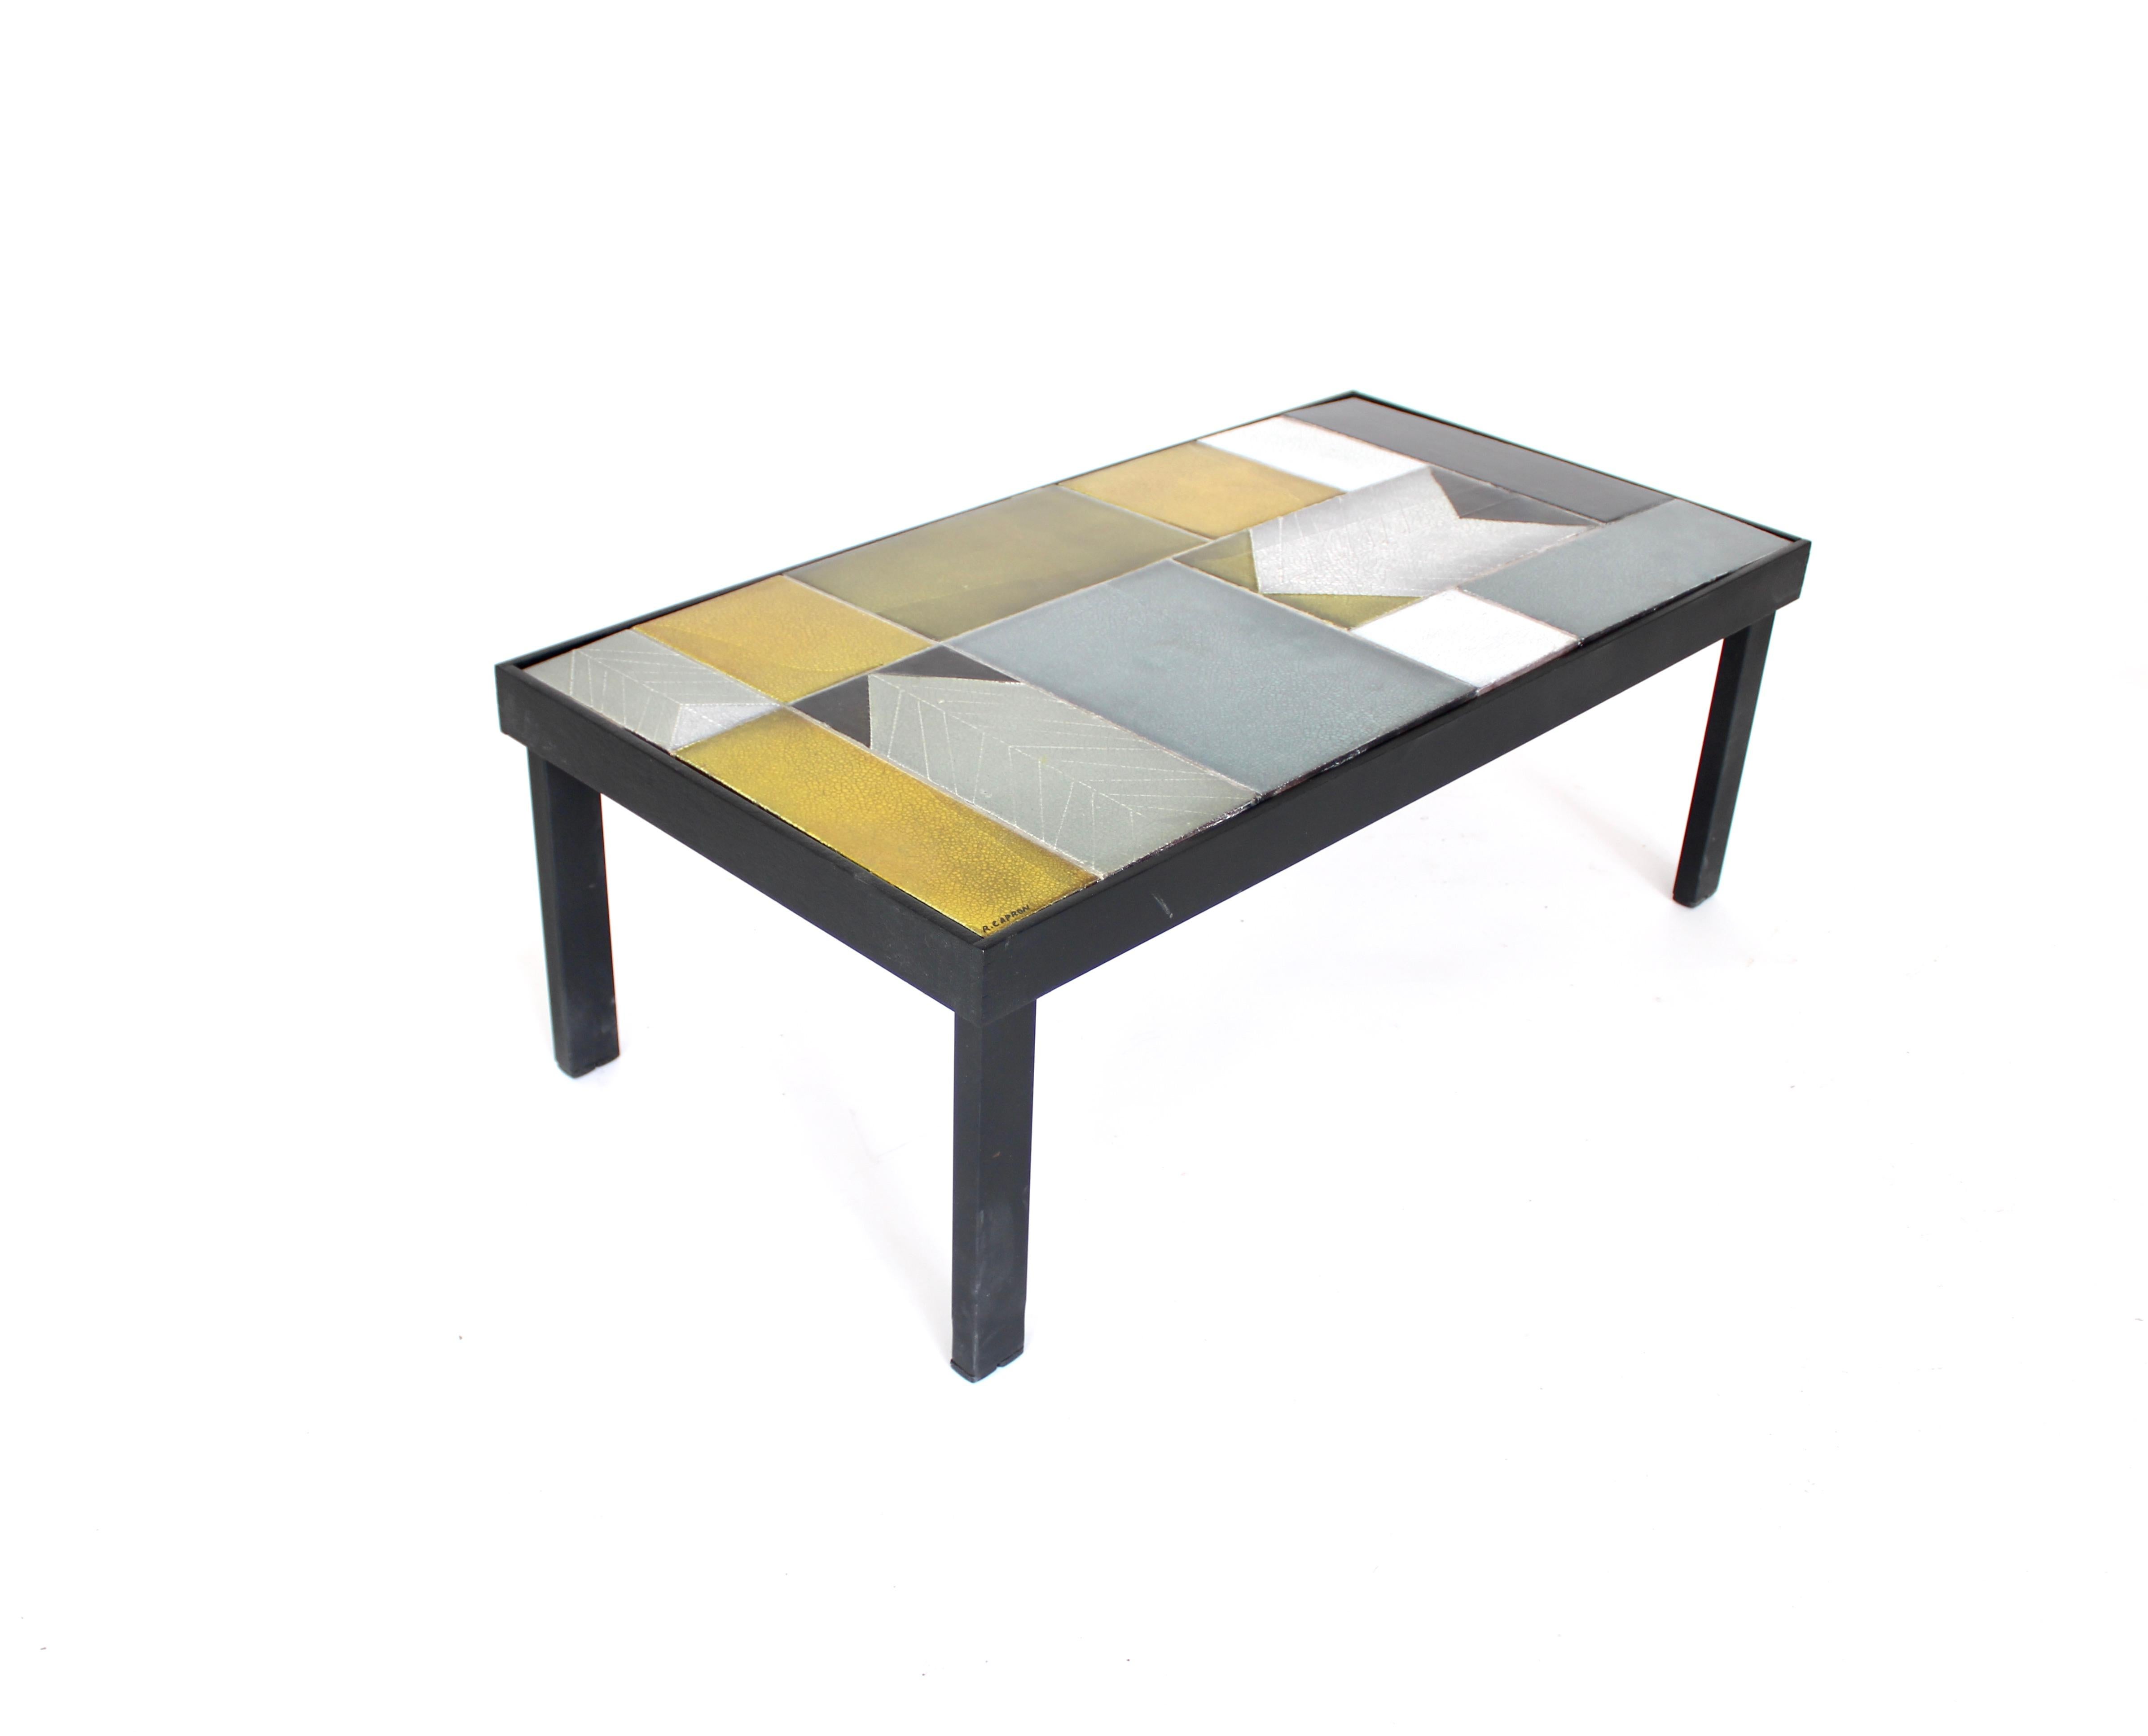 Roger Capron ceramic tiled coffee table in an abstract design and arrangement of the tiles. 
This style was often done by Capron during the 60's which was less literal and more abstract. The use of color is very different than the previous more